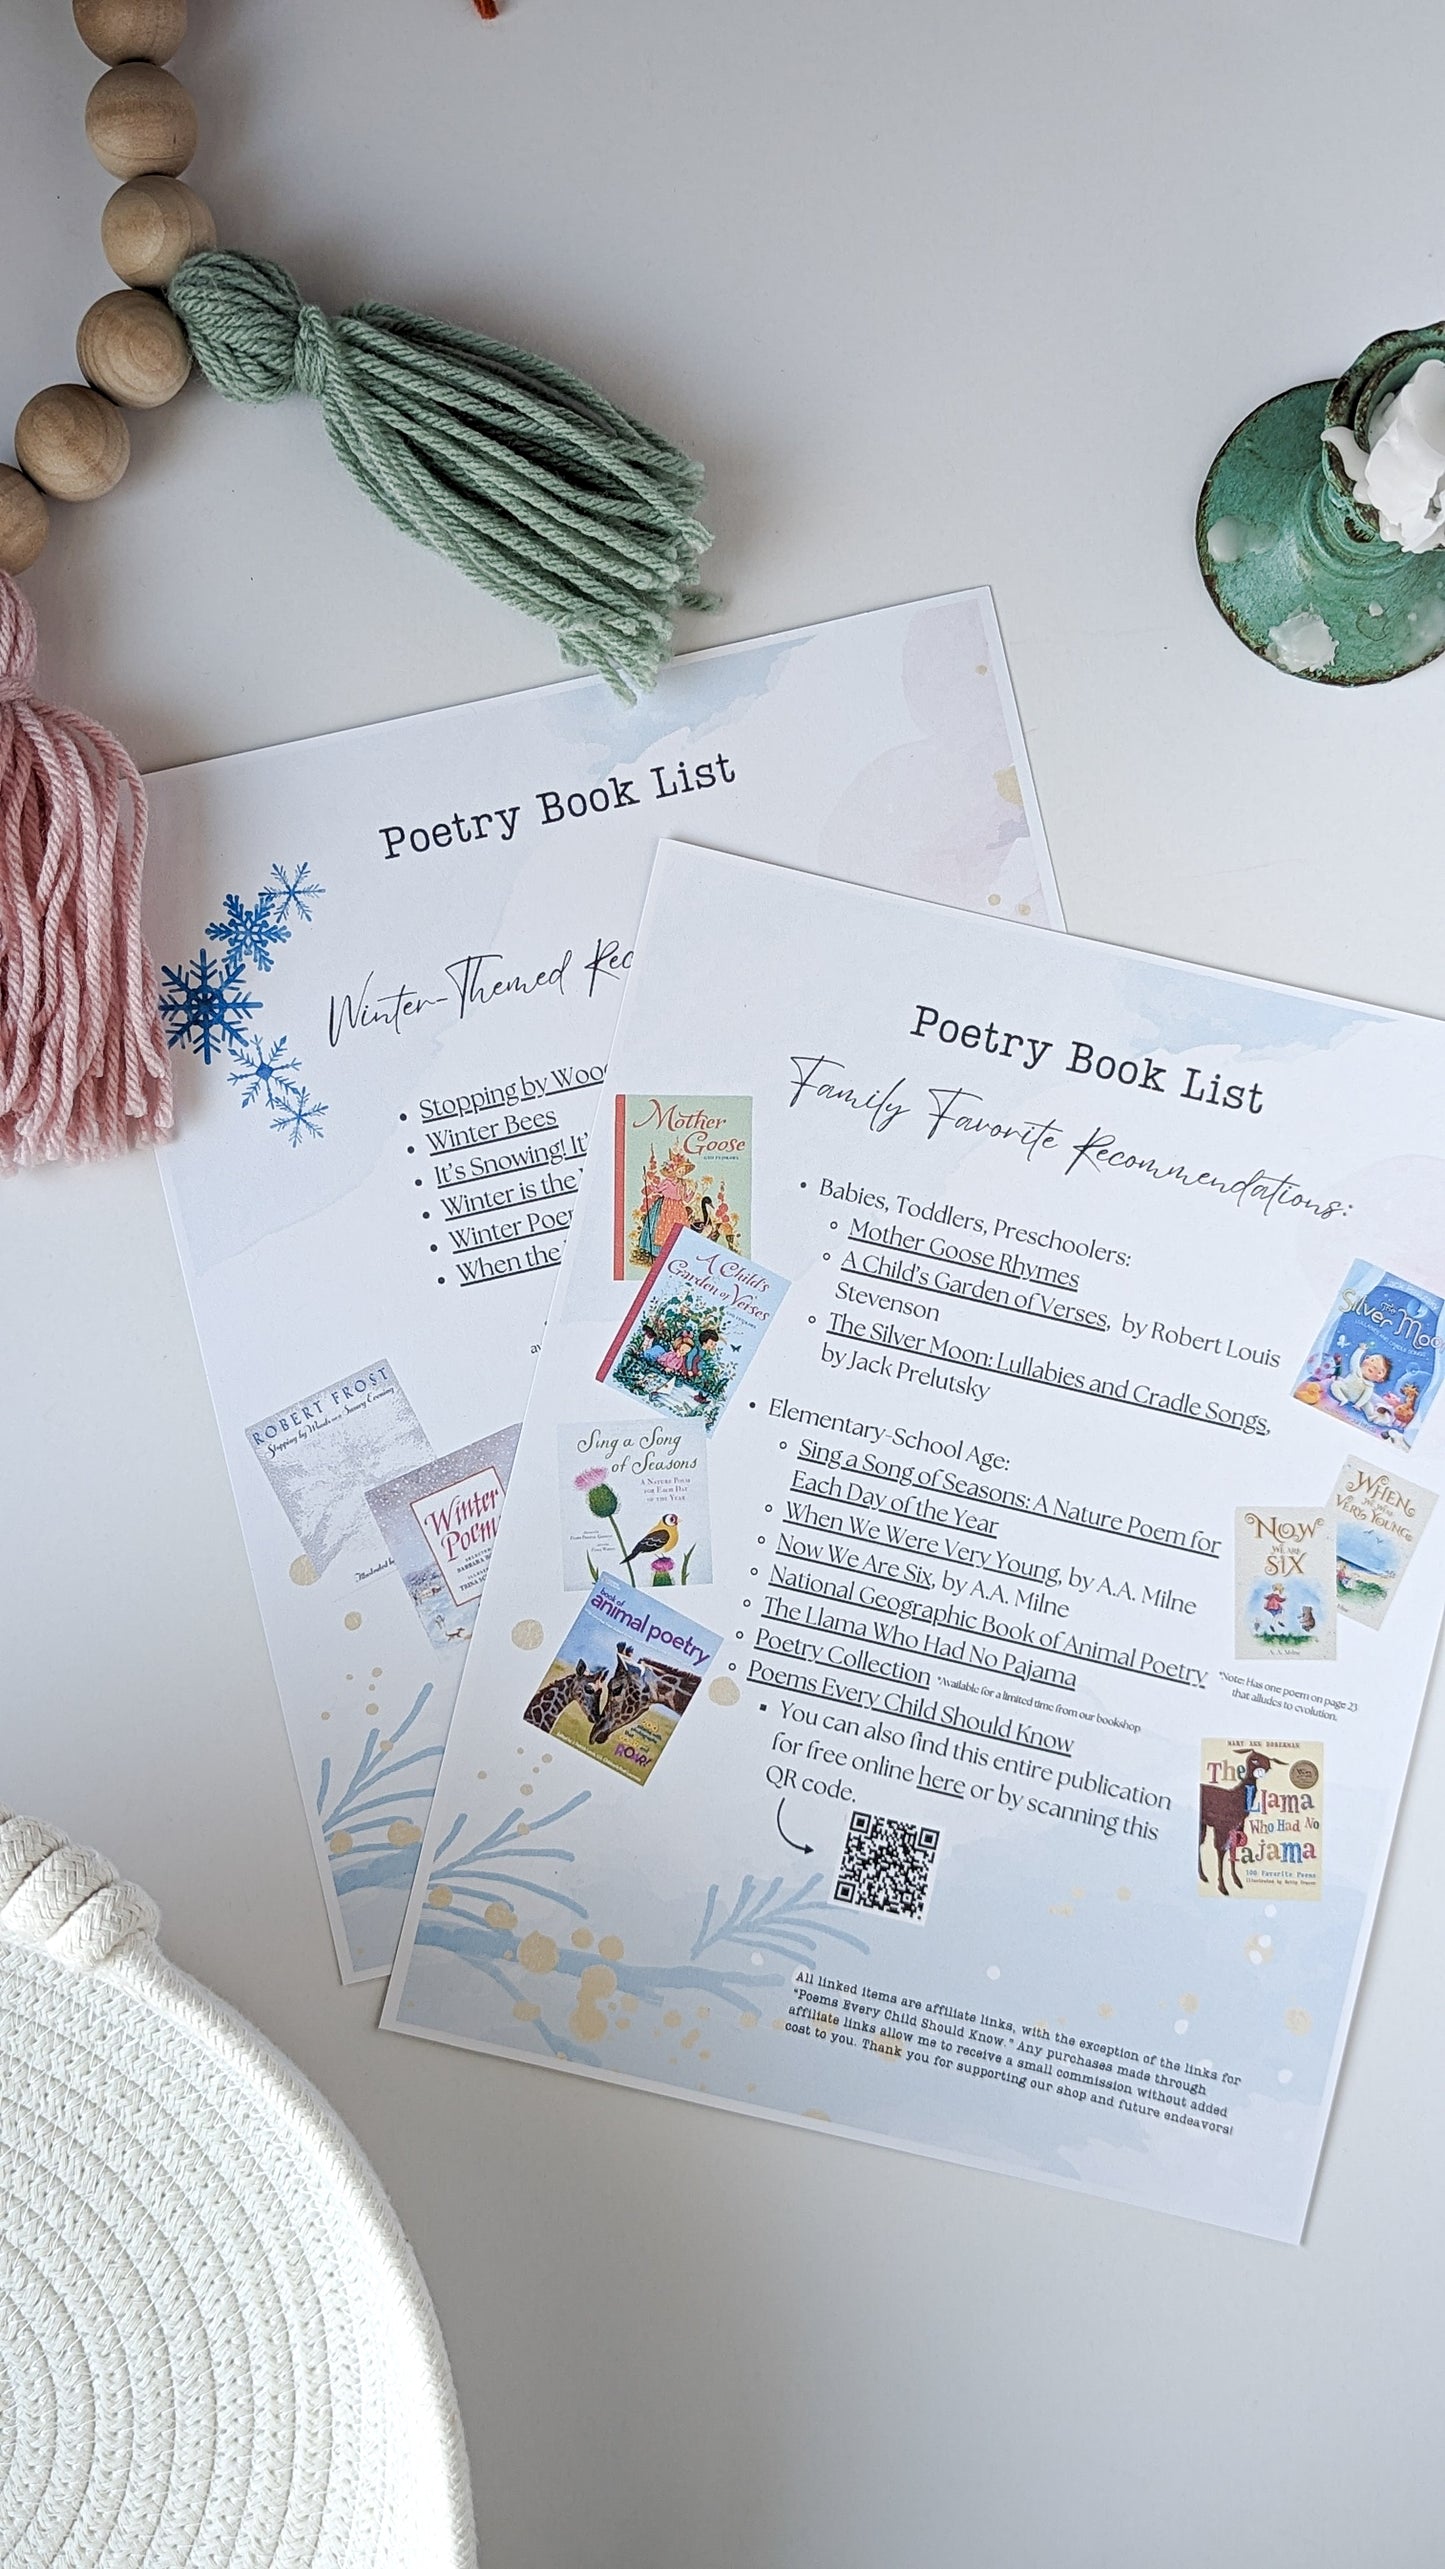 Poetry at the Table: Getting Started Guide [Winter Edition]